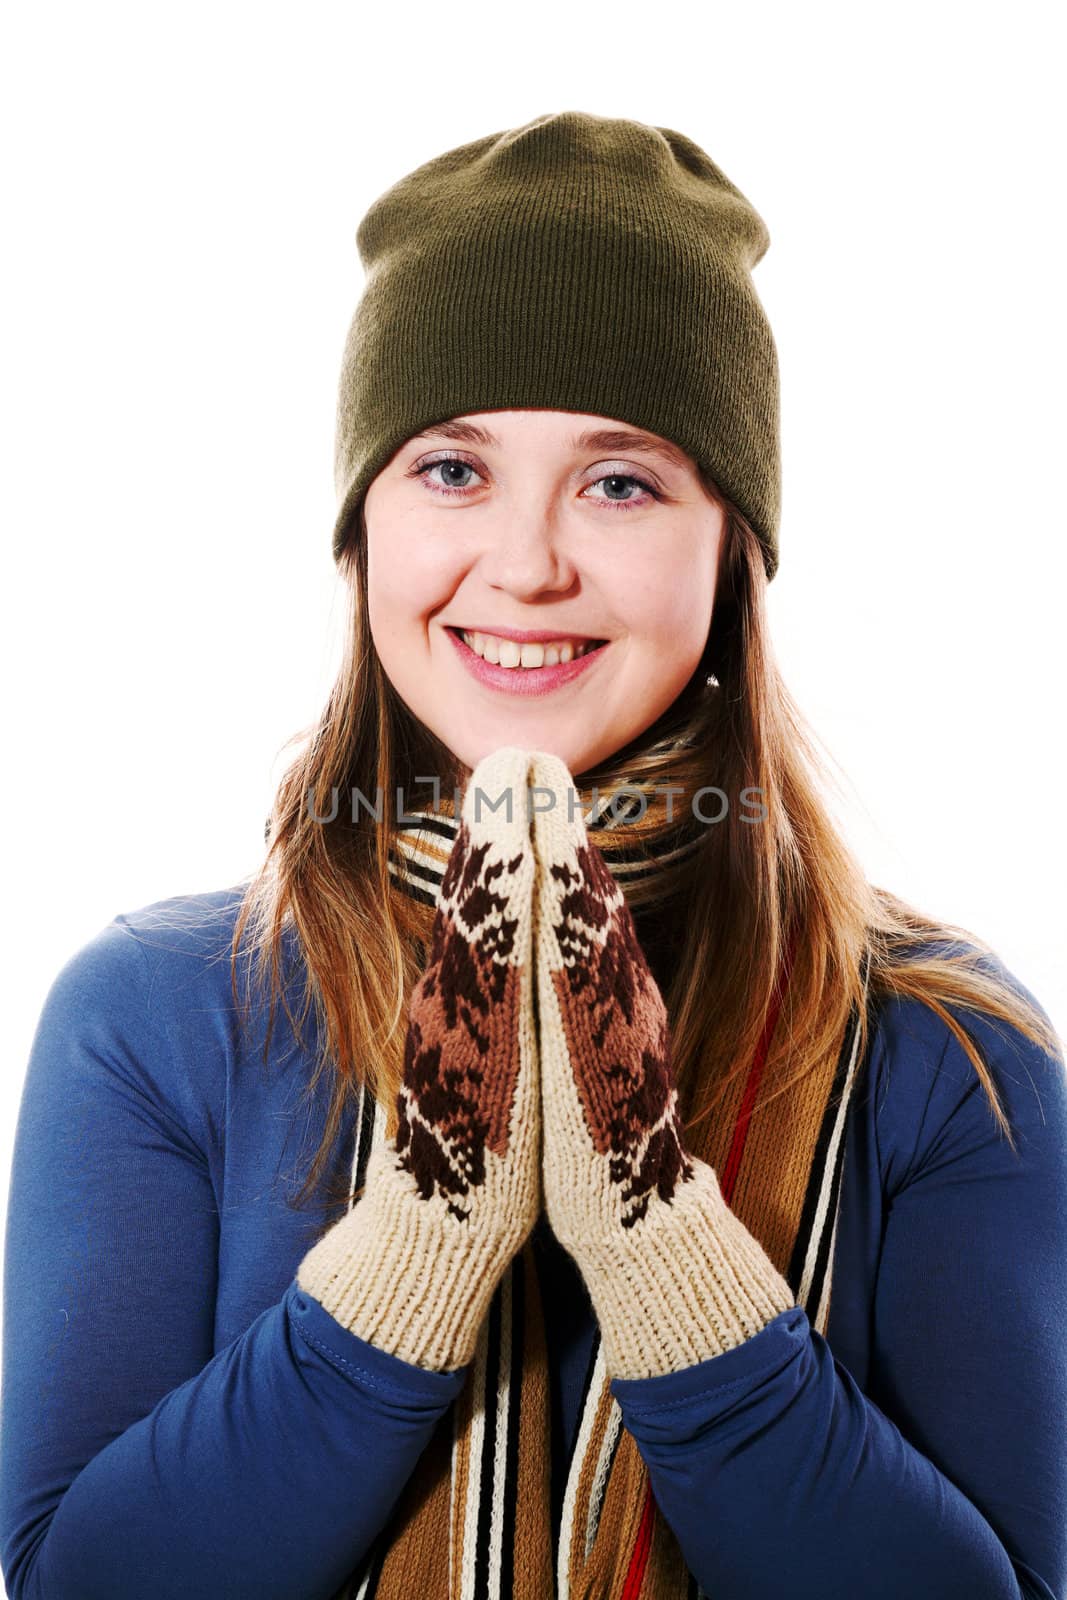 An image of a smiling girl with mittens